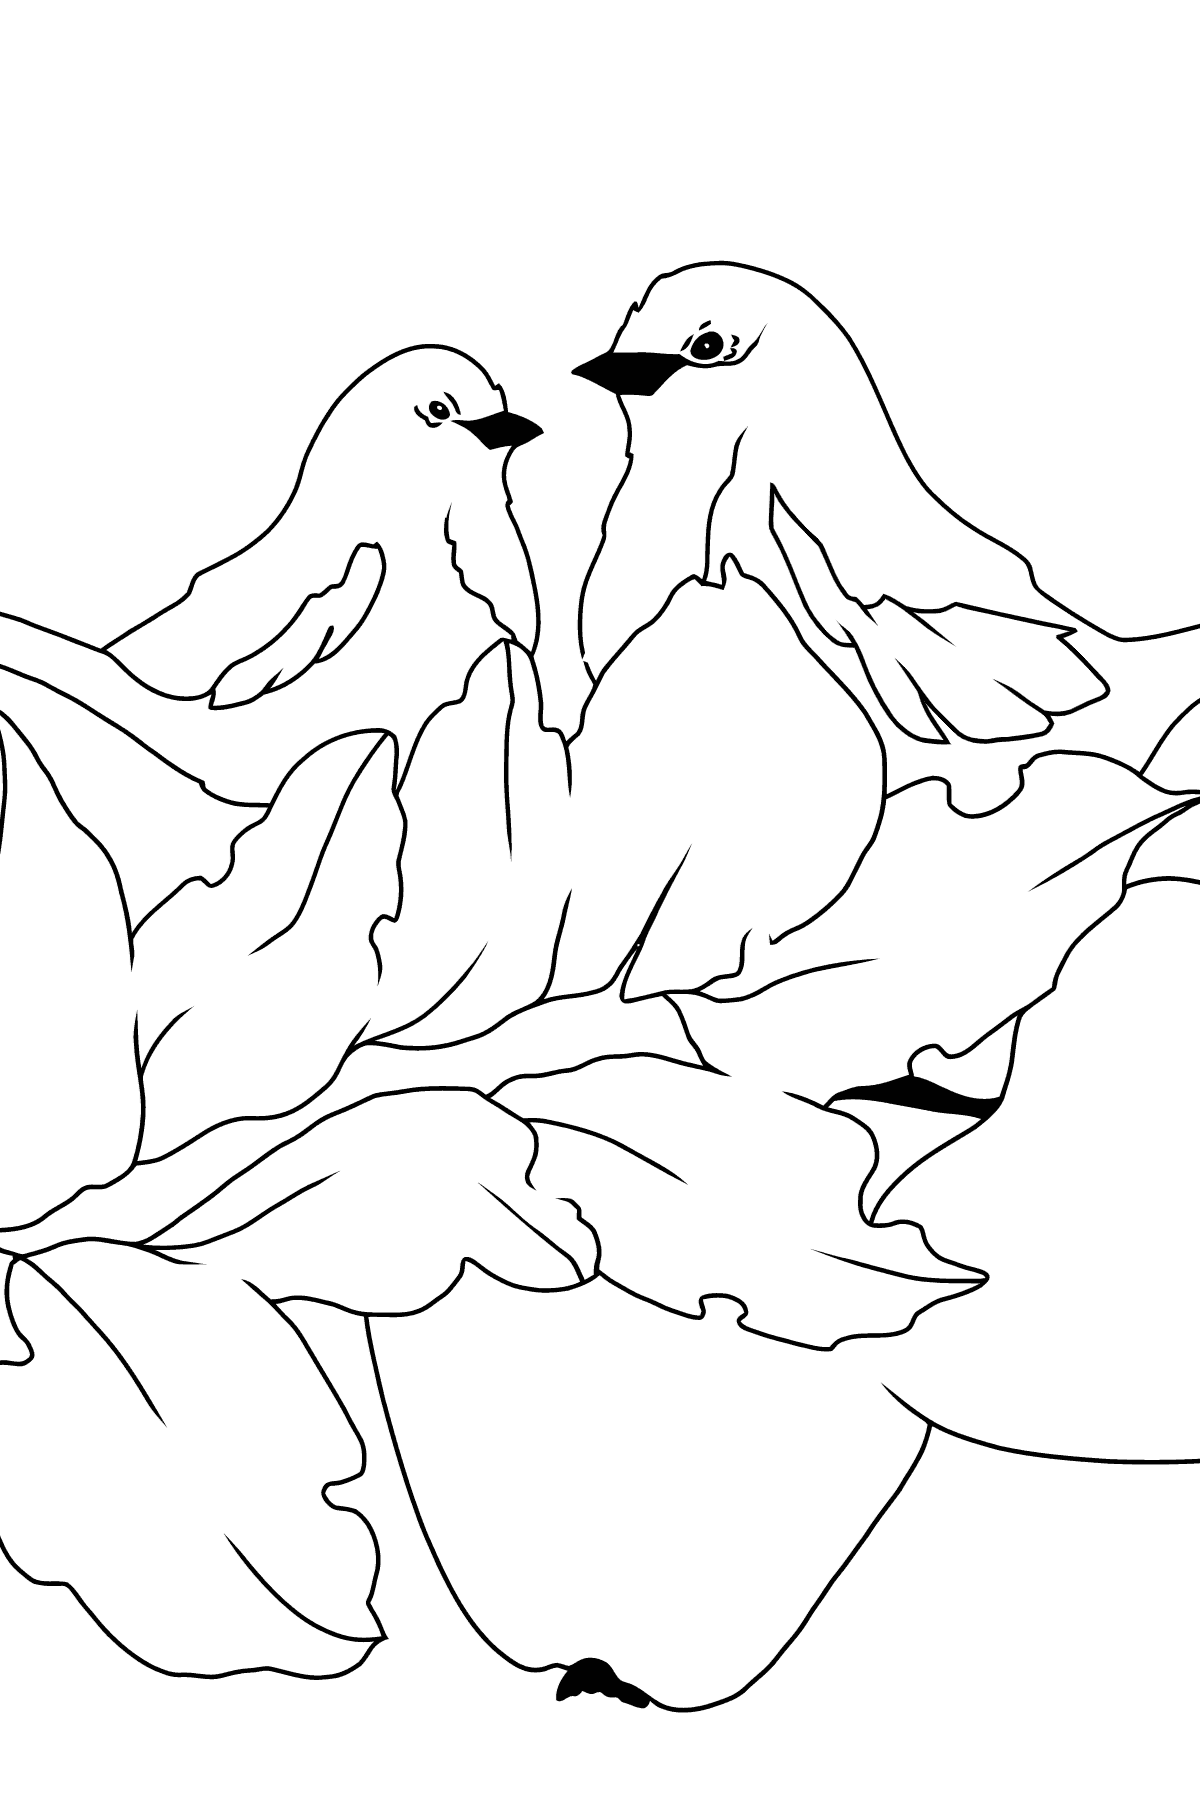 Autumn Coloring Page - Birds on a Branch with Apples for Children 